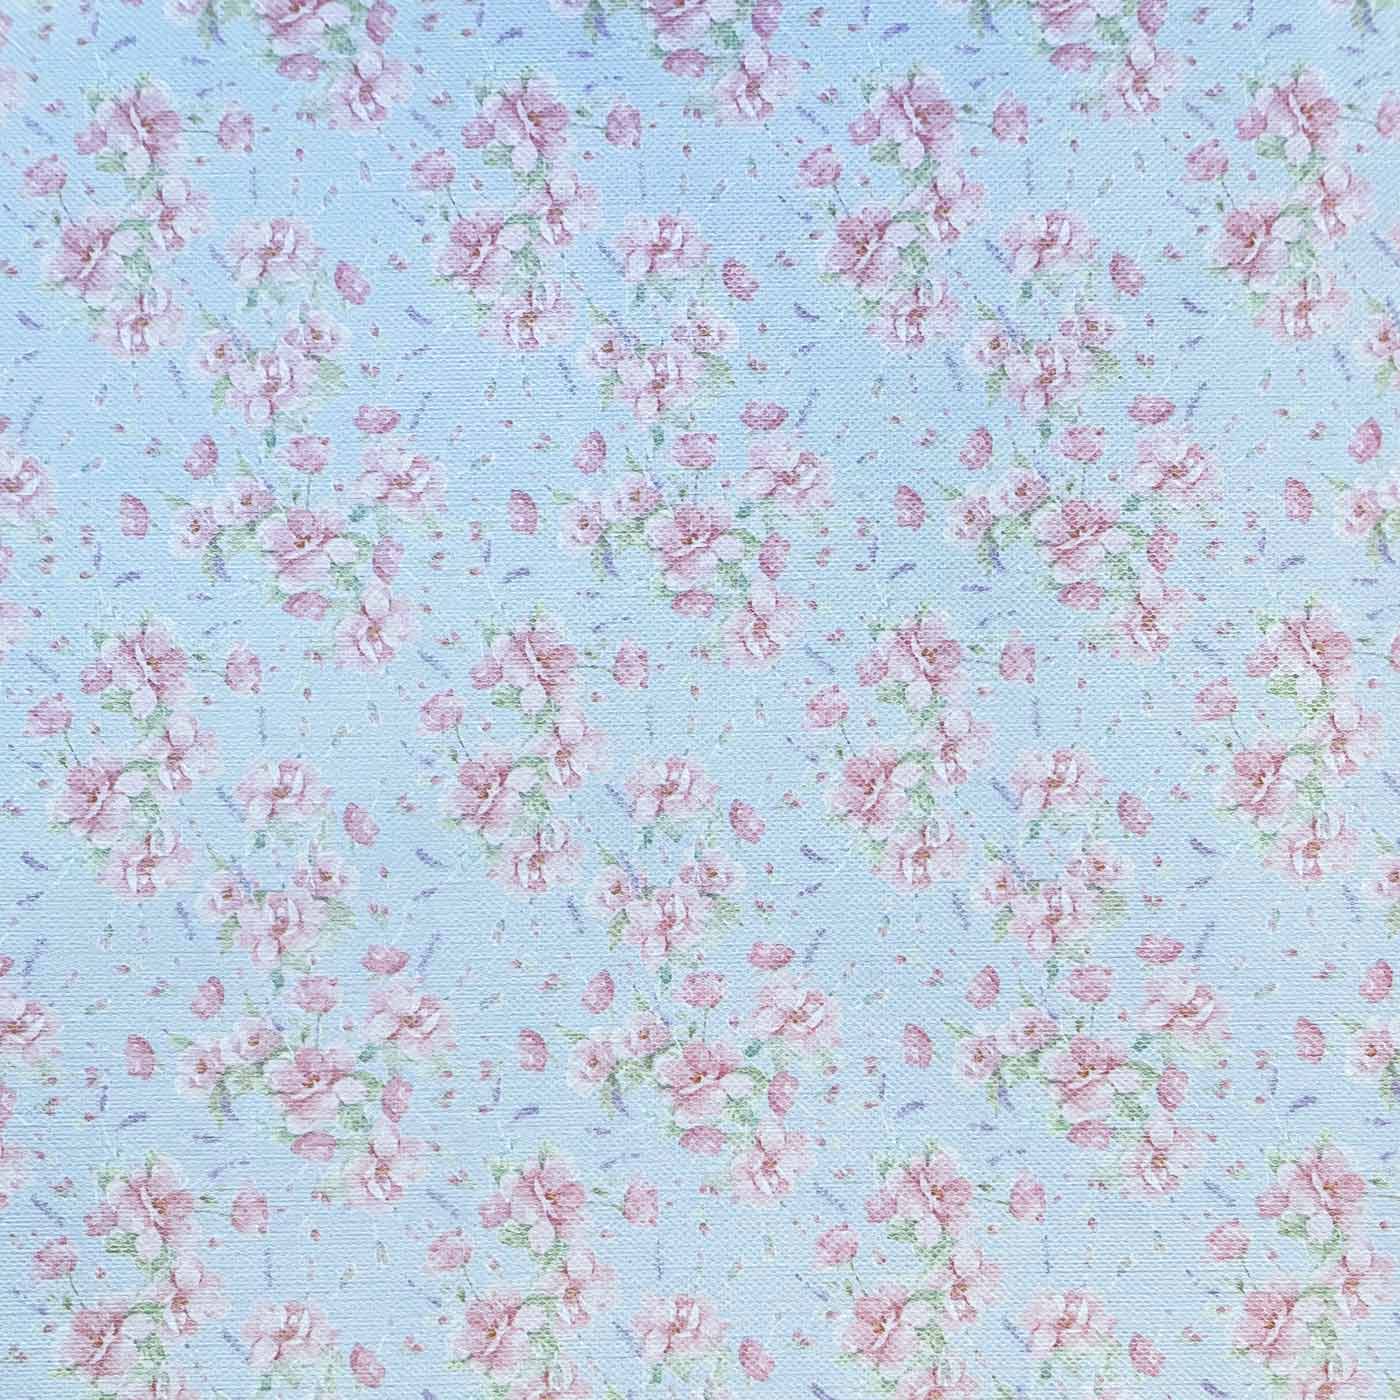 Blossom-blue-decorative-a4-patterned-paper 1